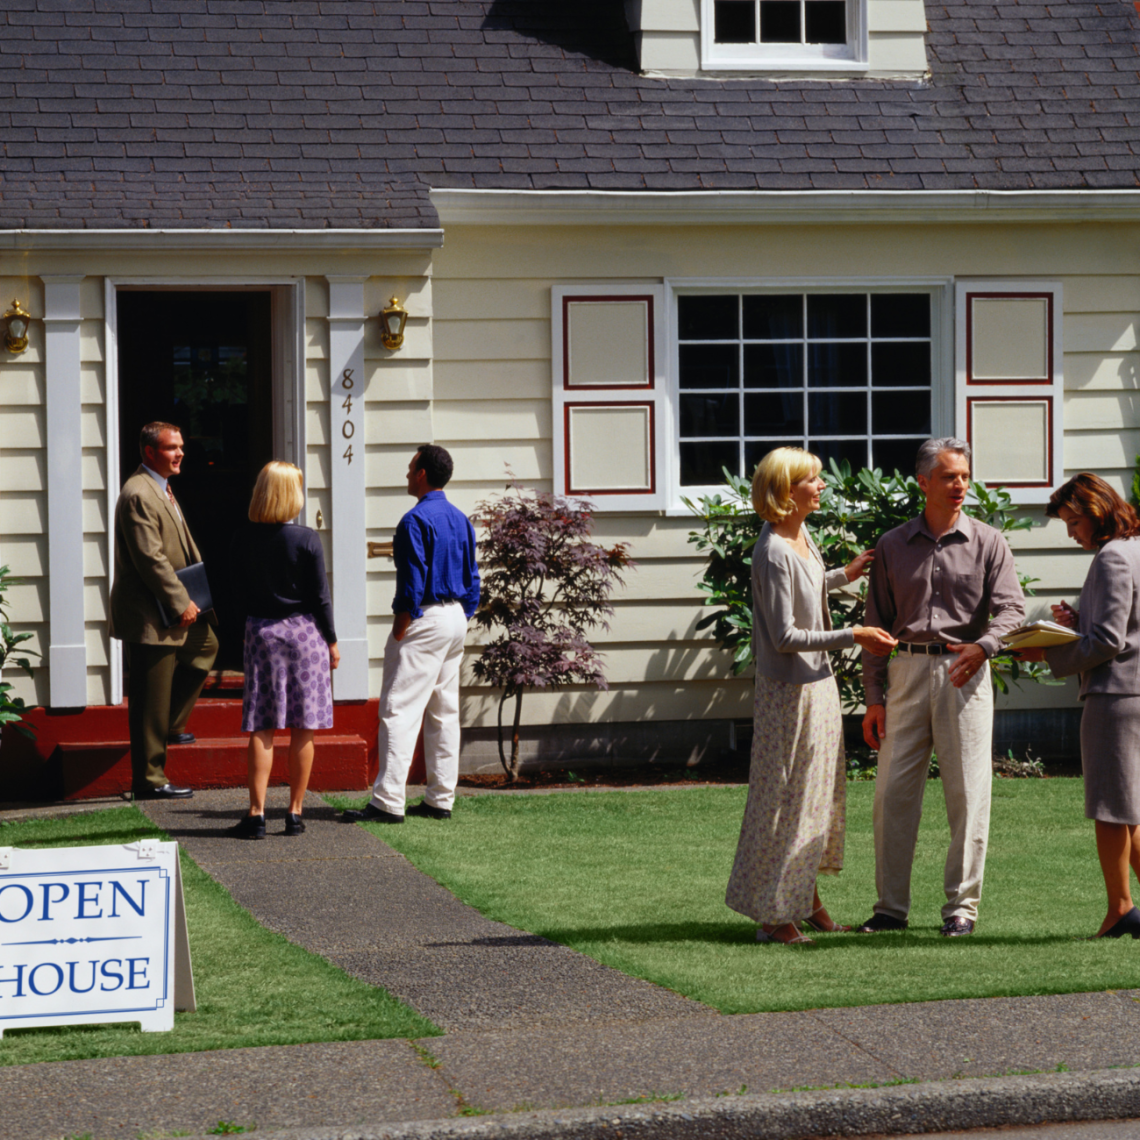 5 Reasons you should NOT go to an open house